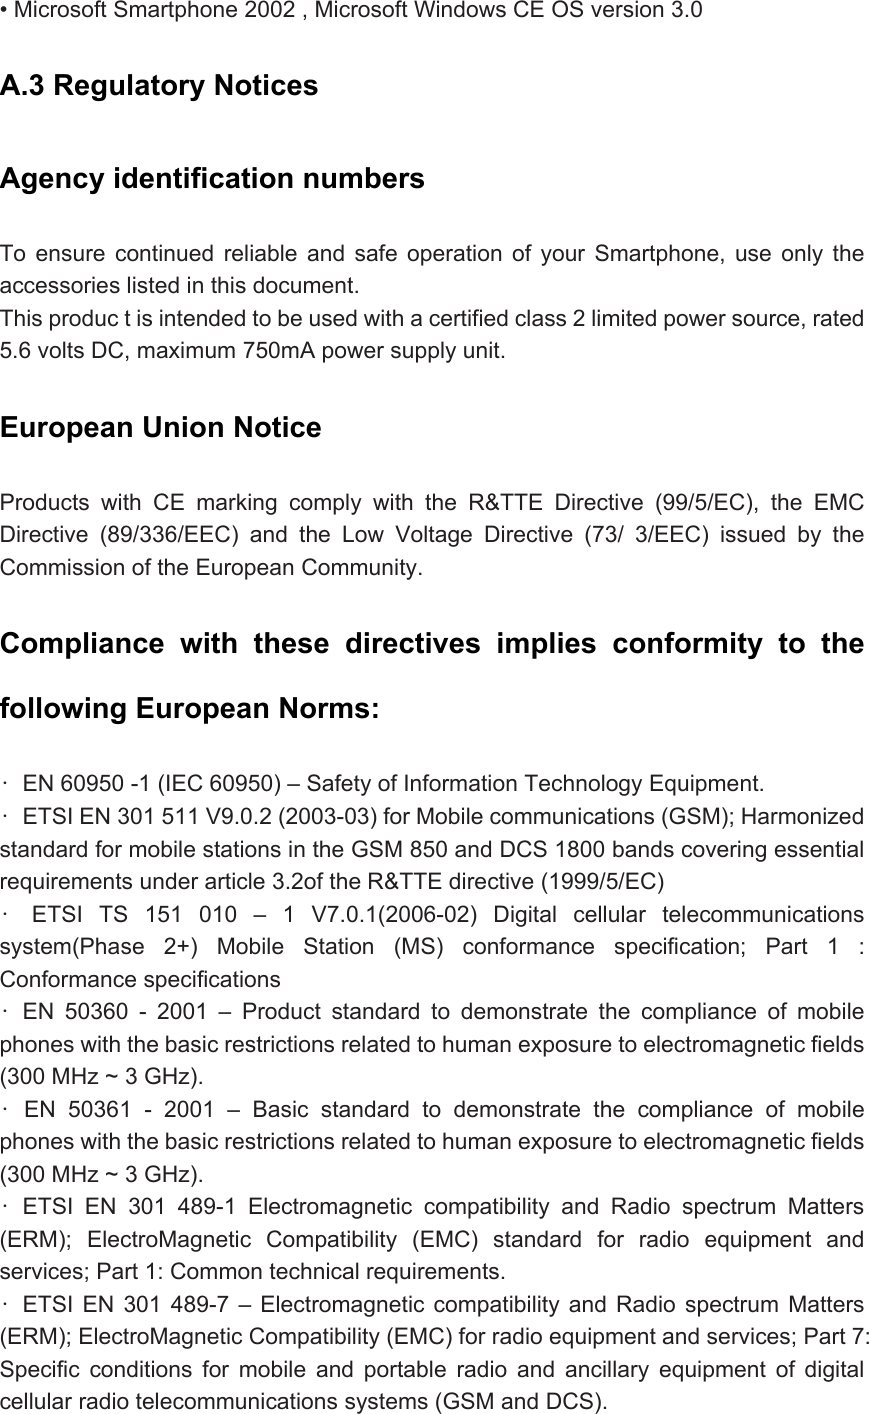 • Microsoft Smartphone 2002 , Microsoft Windows CE OS version 3.0 A.3 Regulatory Notices   Agency identification numbers   To ensure continued reliable and safe operation of your Smartphone, use only the accessories listed in this document.   This produc t is intended to be used with a certified class 2 limited power source, rated 5.6 volts DC, maximum 750mA power supply unit.   European Union Notice   Products with CE marking comply with the R&amp;TTE Directive (99/5/EC), the EMC Directive (89/336/EEC) and the Low Voltage Directive (73/ 3/EEC) issued by the Commission of the European Community. Compliance with these directives implies conformity to the following European Norms:   •  EN 60950 -1 (IEC 60950) – Safety of Information Technology Equipment.   •  ETSI EN 301 511 V9.0.2 (2003-03) for Mobile communications (GSM); Harmonized standard for mobile stations in the GSM 850 and DCS 1800 bands covering essential requirements under article 3.2of the R&amp;TTE directive (1999/5/EC)   • ETSI TS 151 010 – 1 V7.0.1(2006-02) Digital cellular telecommunications system(Phase 2+) Mobile Station (MS) conformance specification; Part 1 : Conformance specifications   • EN 50360 - 2001 – Product standard to demonstrate the compliance of mobile phones with the basic restrictions related to human exposure to electromagnetic fields (300 MHz ~ 3 GHz).   • EN 50361 - 2001 – Basic standard to demonstrate the compliance of mobile phones with the basic restrictions related to human exposure to electromagnetic fields (300 MHz ~ 3 GHz). • ETSI EN 301 489-1 Electromagnetic compatibility and Radio spectrum Matters (ERM); ElectroMagnetic Compatibility (EMC) standard for radio equipment and services; Part 1: Common technical requirements.   • ETSI EN 301 489-7 – Electromagnetic compatibility and Radio spectrum Matters (ERM); ElectroMagnetic Compatibility (EMC) for radio equipment and services; Part 7: Specific conditions for mobile and portable radio and ancillary equipment of digital cellular radio telecommunications systems (GSM and DCS).   